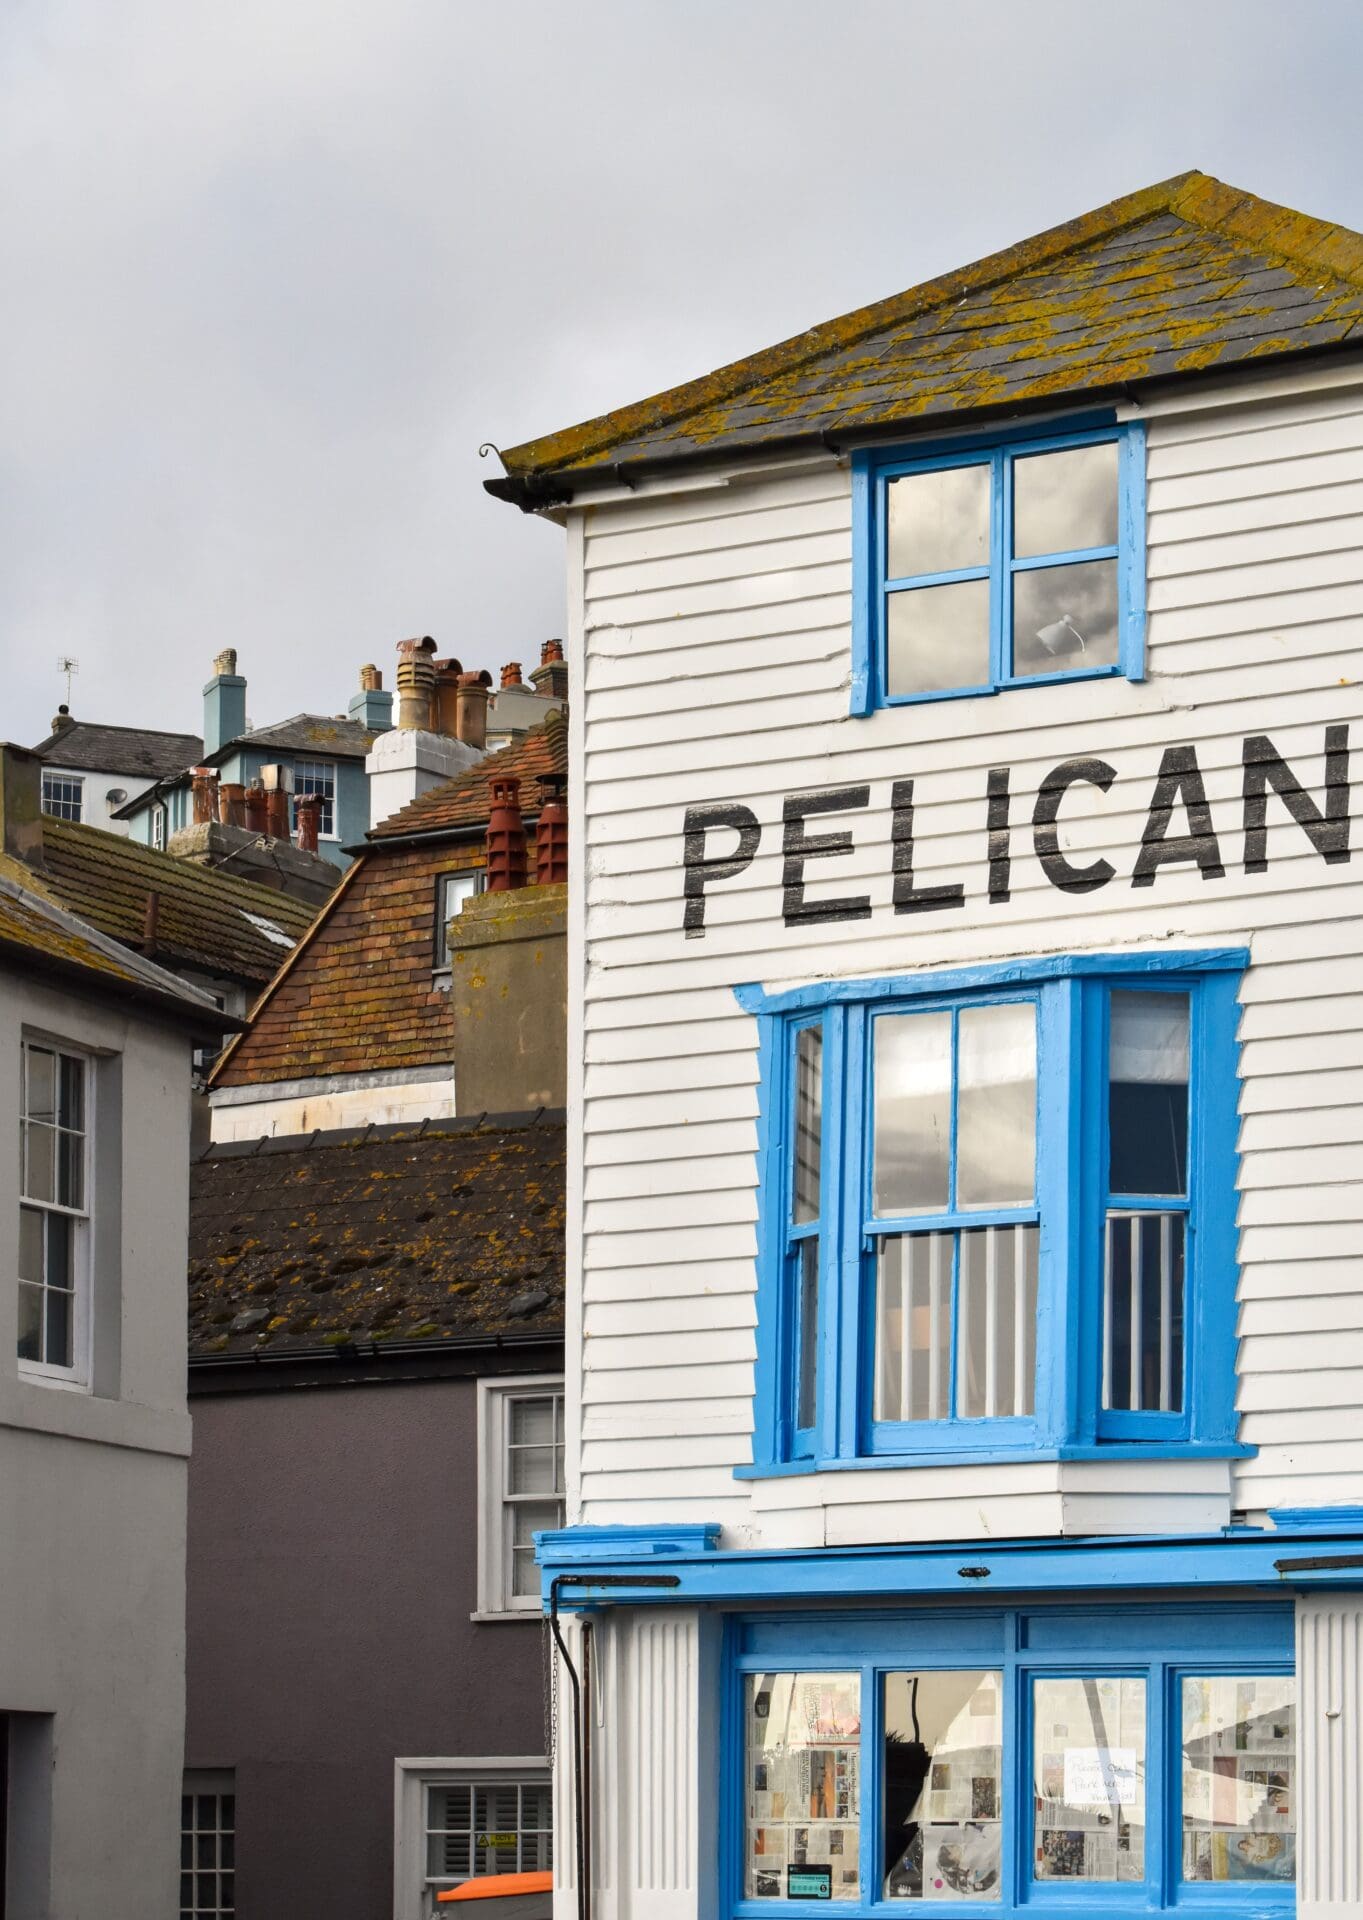 A weekend in Hastings | A clapboard house with blue painted window frames, with the word PELICAN written across it